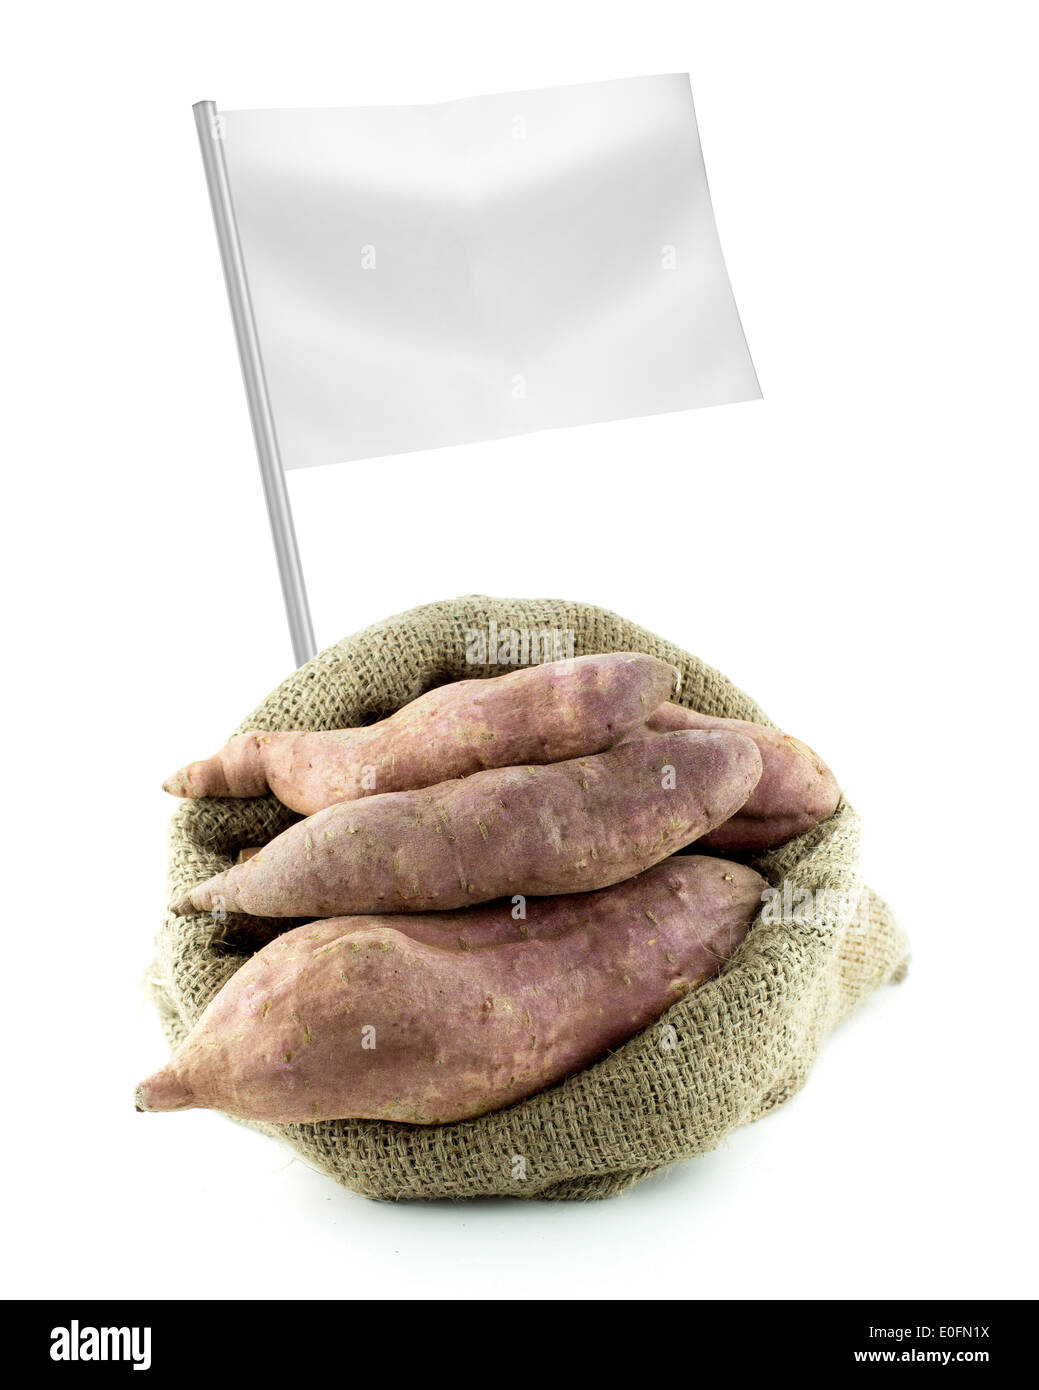 Healthy and organic food concept. Fresh sweet potatoes with flag showing the benefits or the price of fruits. Stock Photo